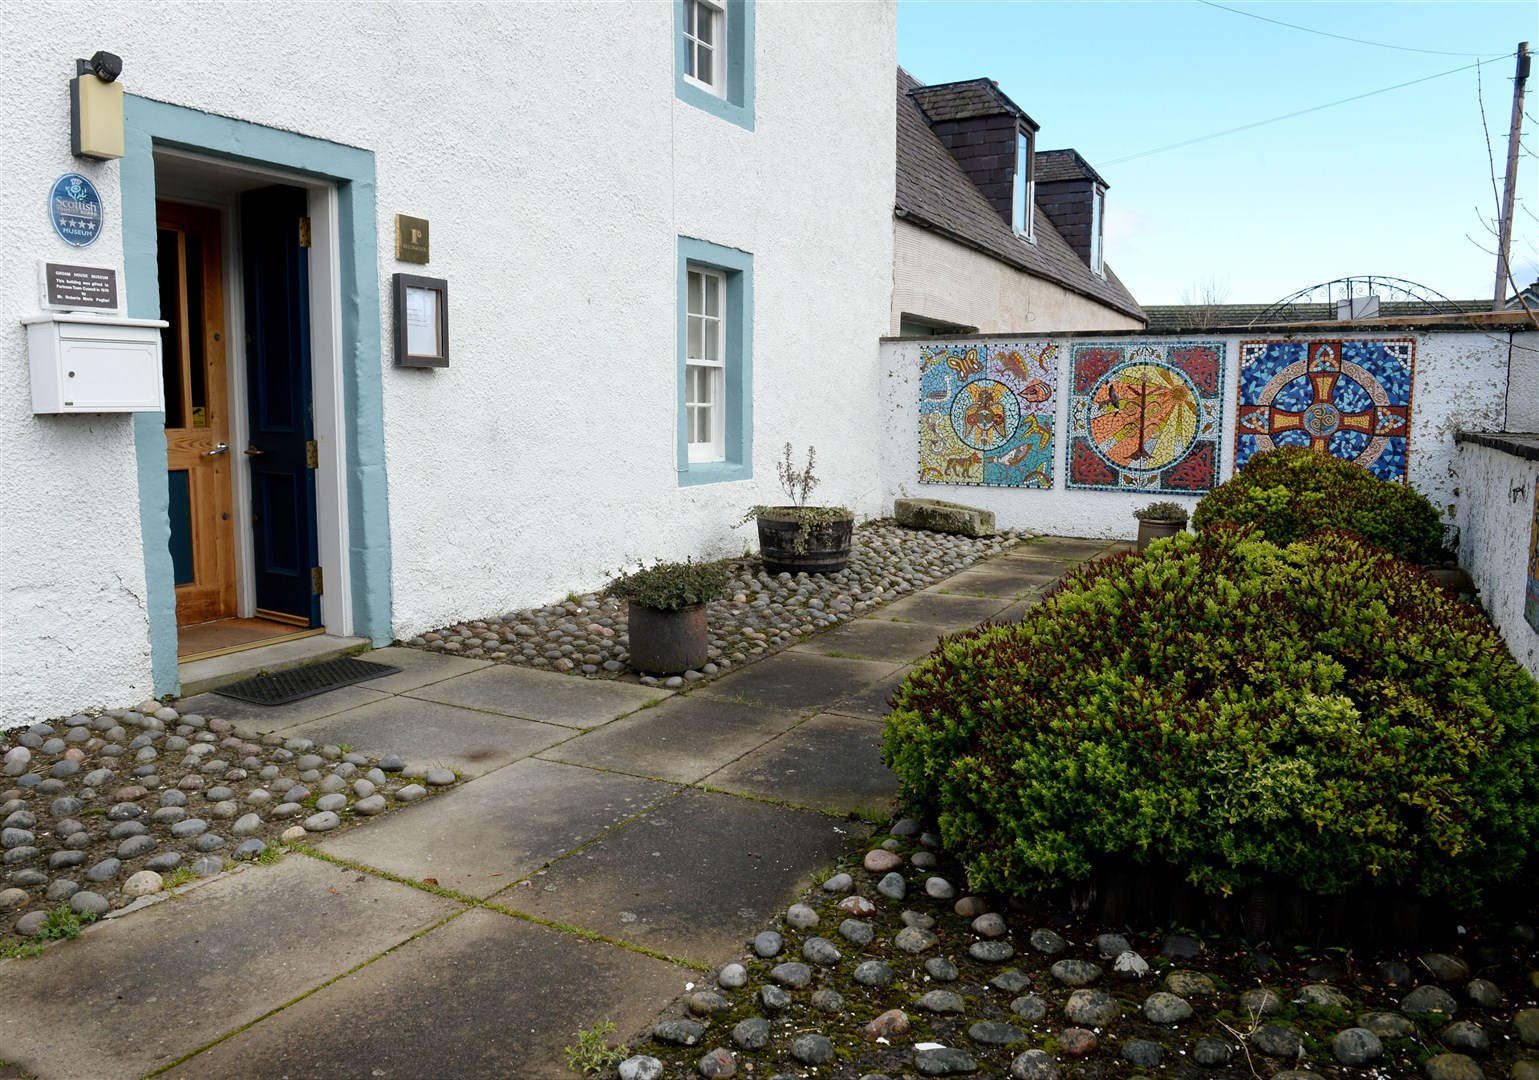 Groam House Museum, Rosemarkie. Shortlisted for Tesco cash award to improve outdoor space.The area they are hoping to improve.Picture: Gary Anthony. Image No. 036530.